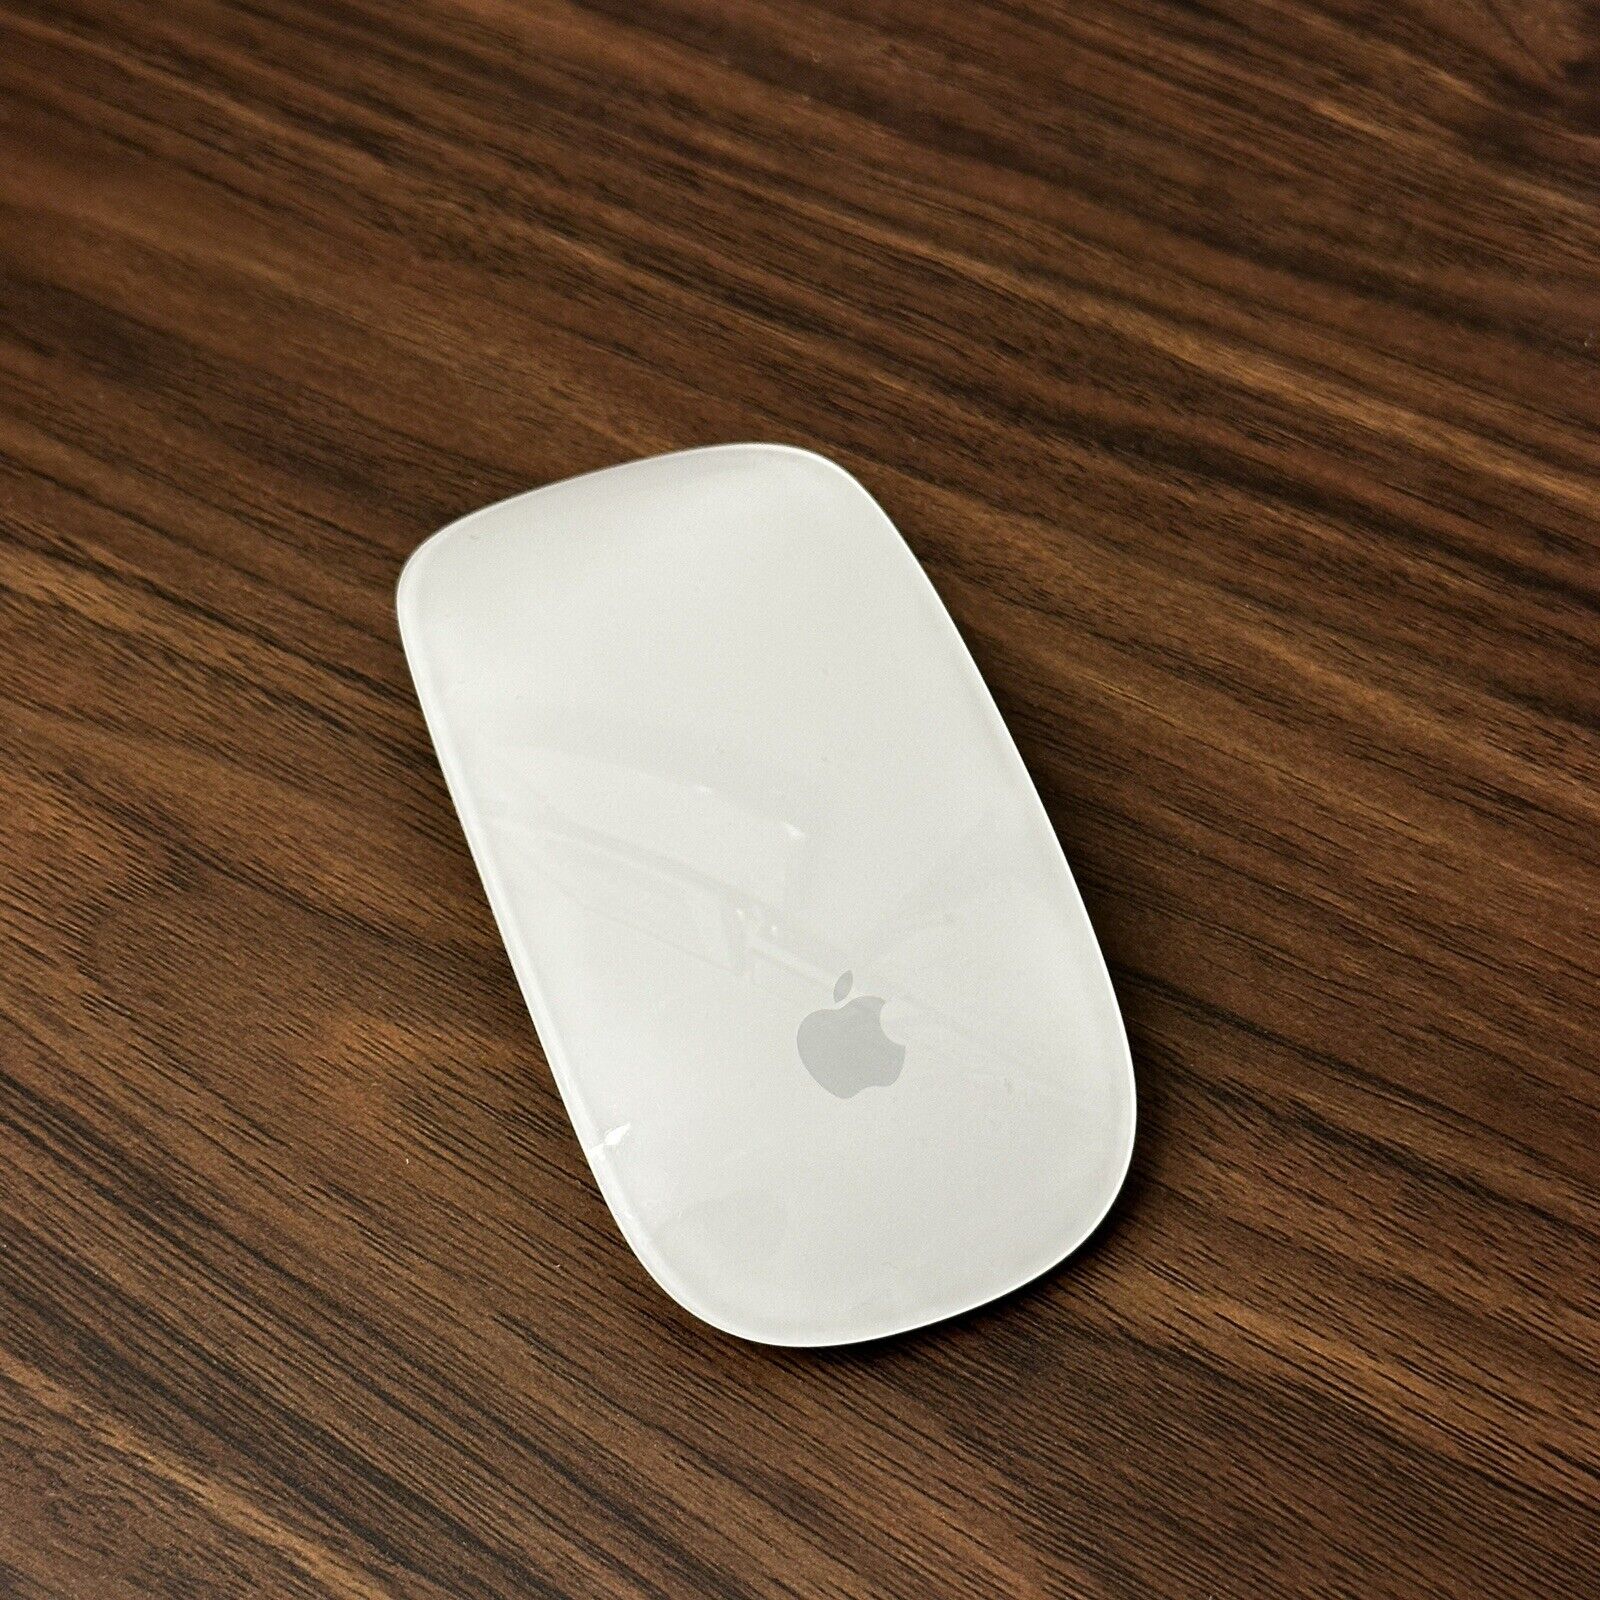 TESTED WORKING GENUINE Apple Bluetooth Wireless Magic Mouse, Multi-Touch - A1296